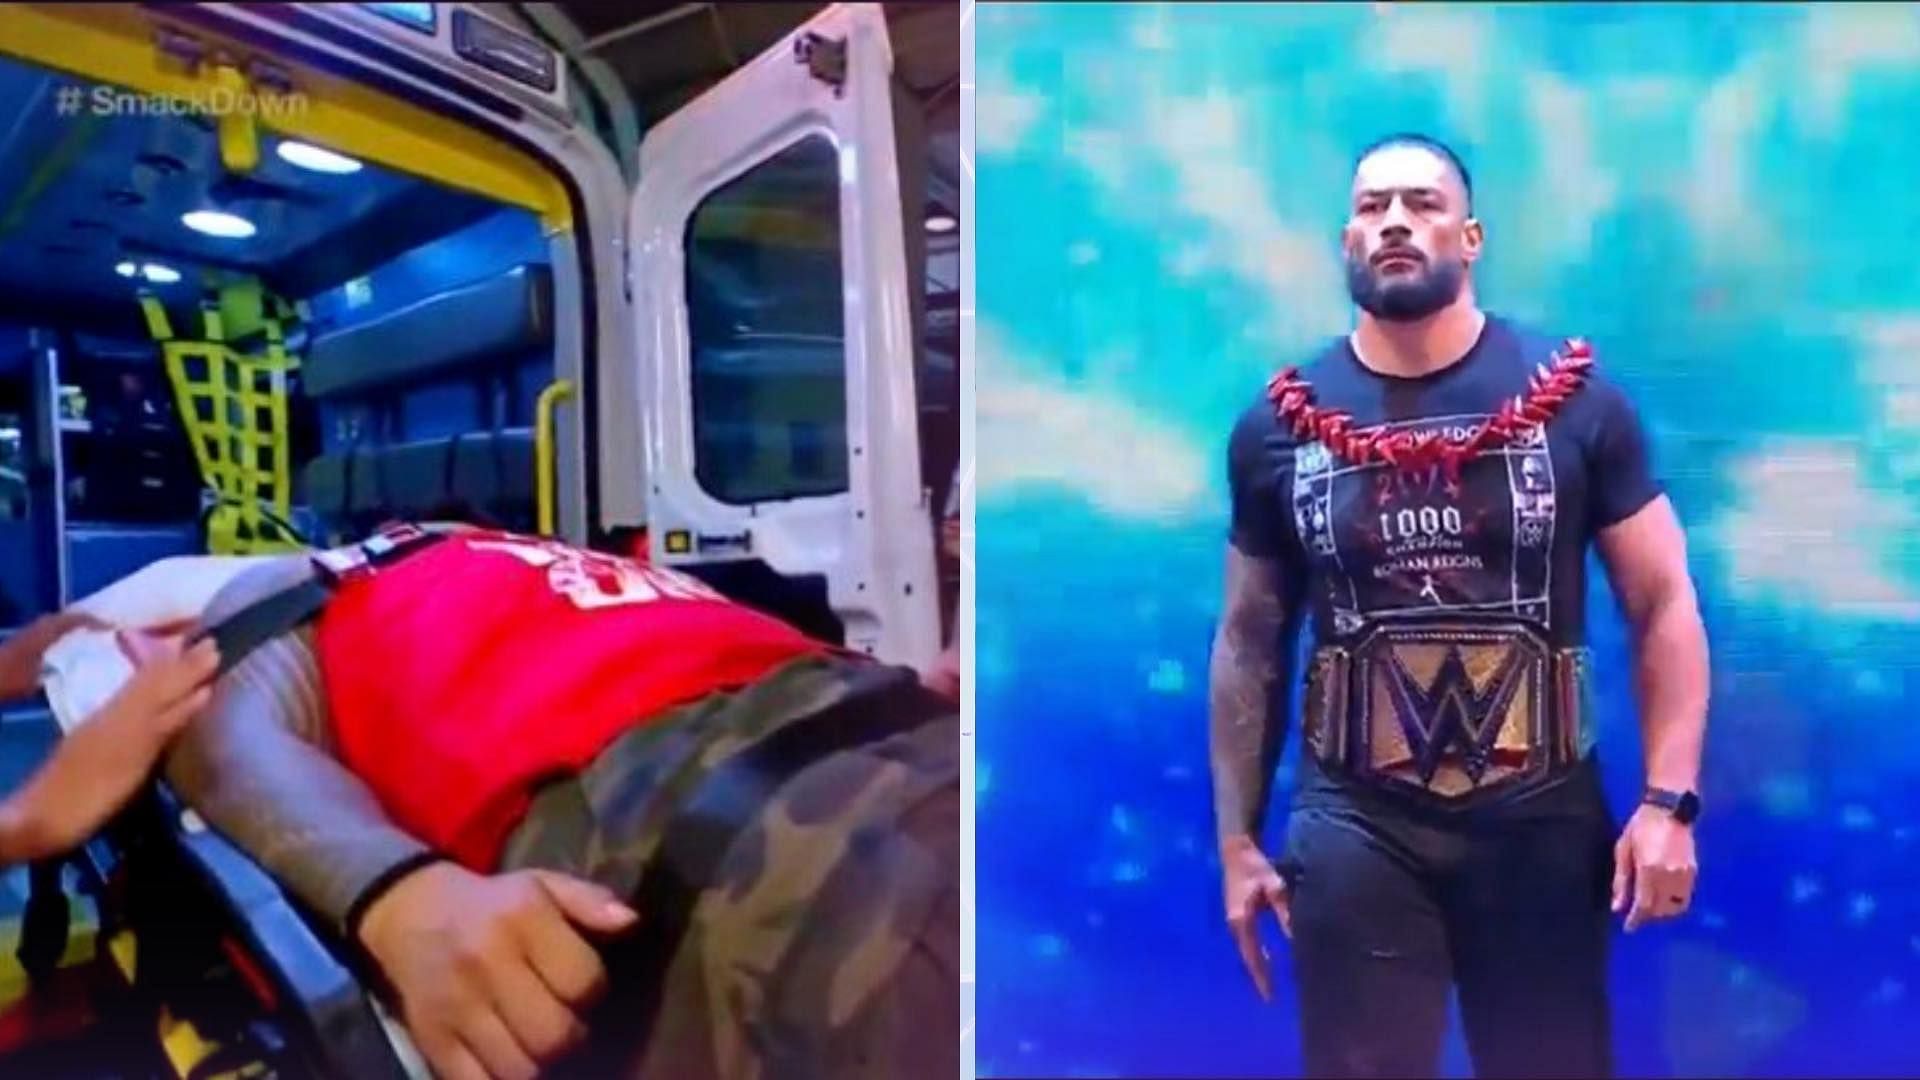 Jimmy Uso was viciously assaulted on WWE Friday Night SmackDown